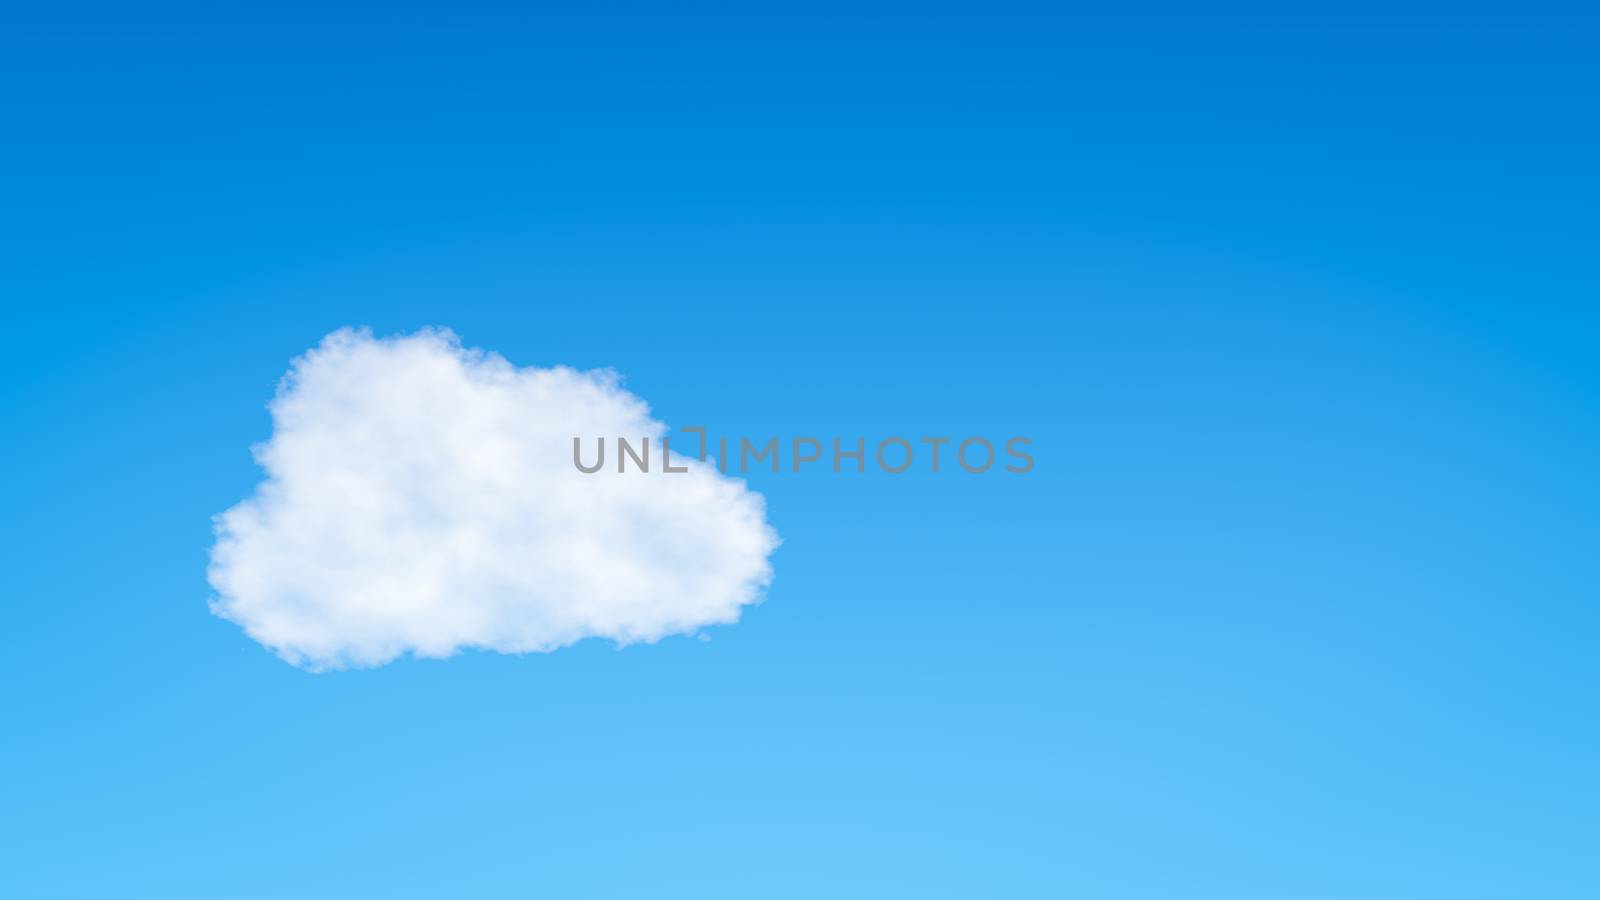 Single Cloud in the Blue Sky with Copyspace